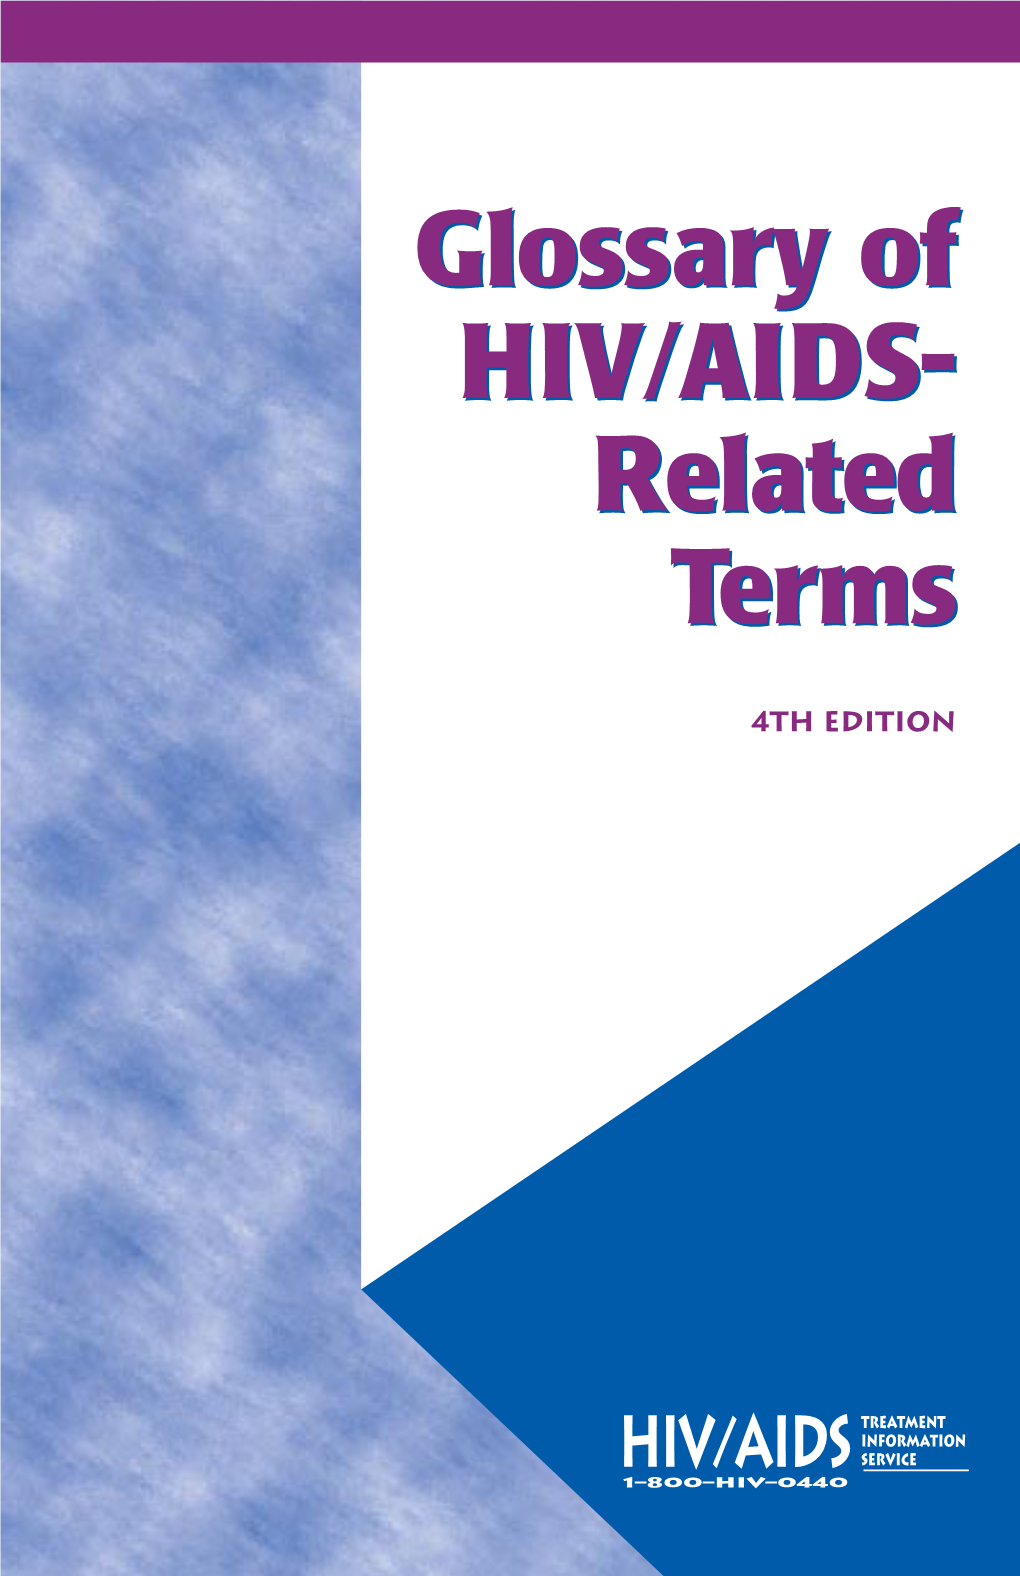 Glossary of HIV/AIDS- Related Terms